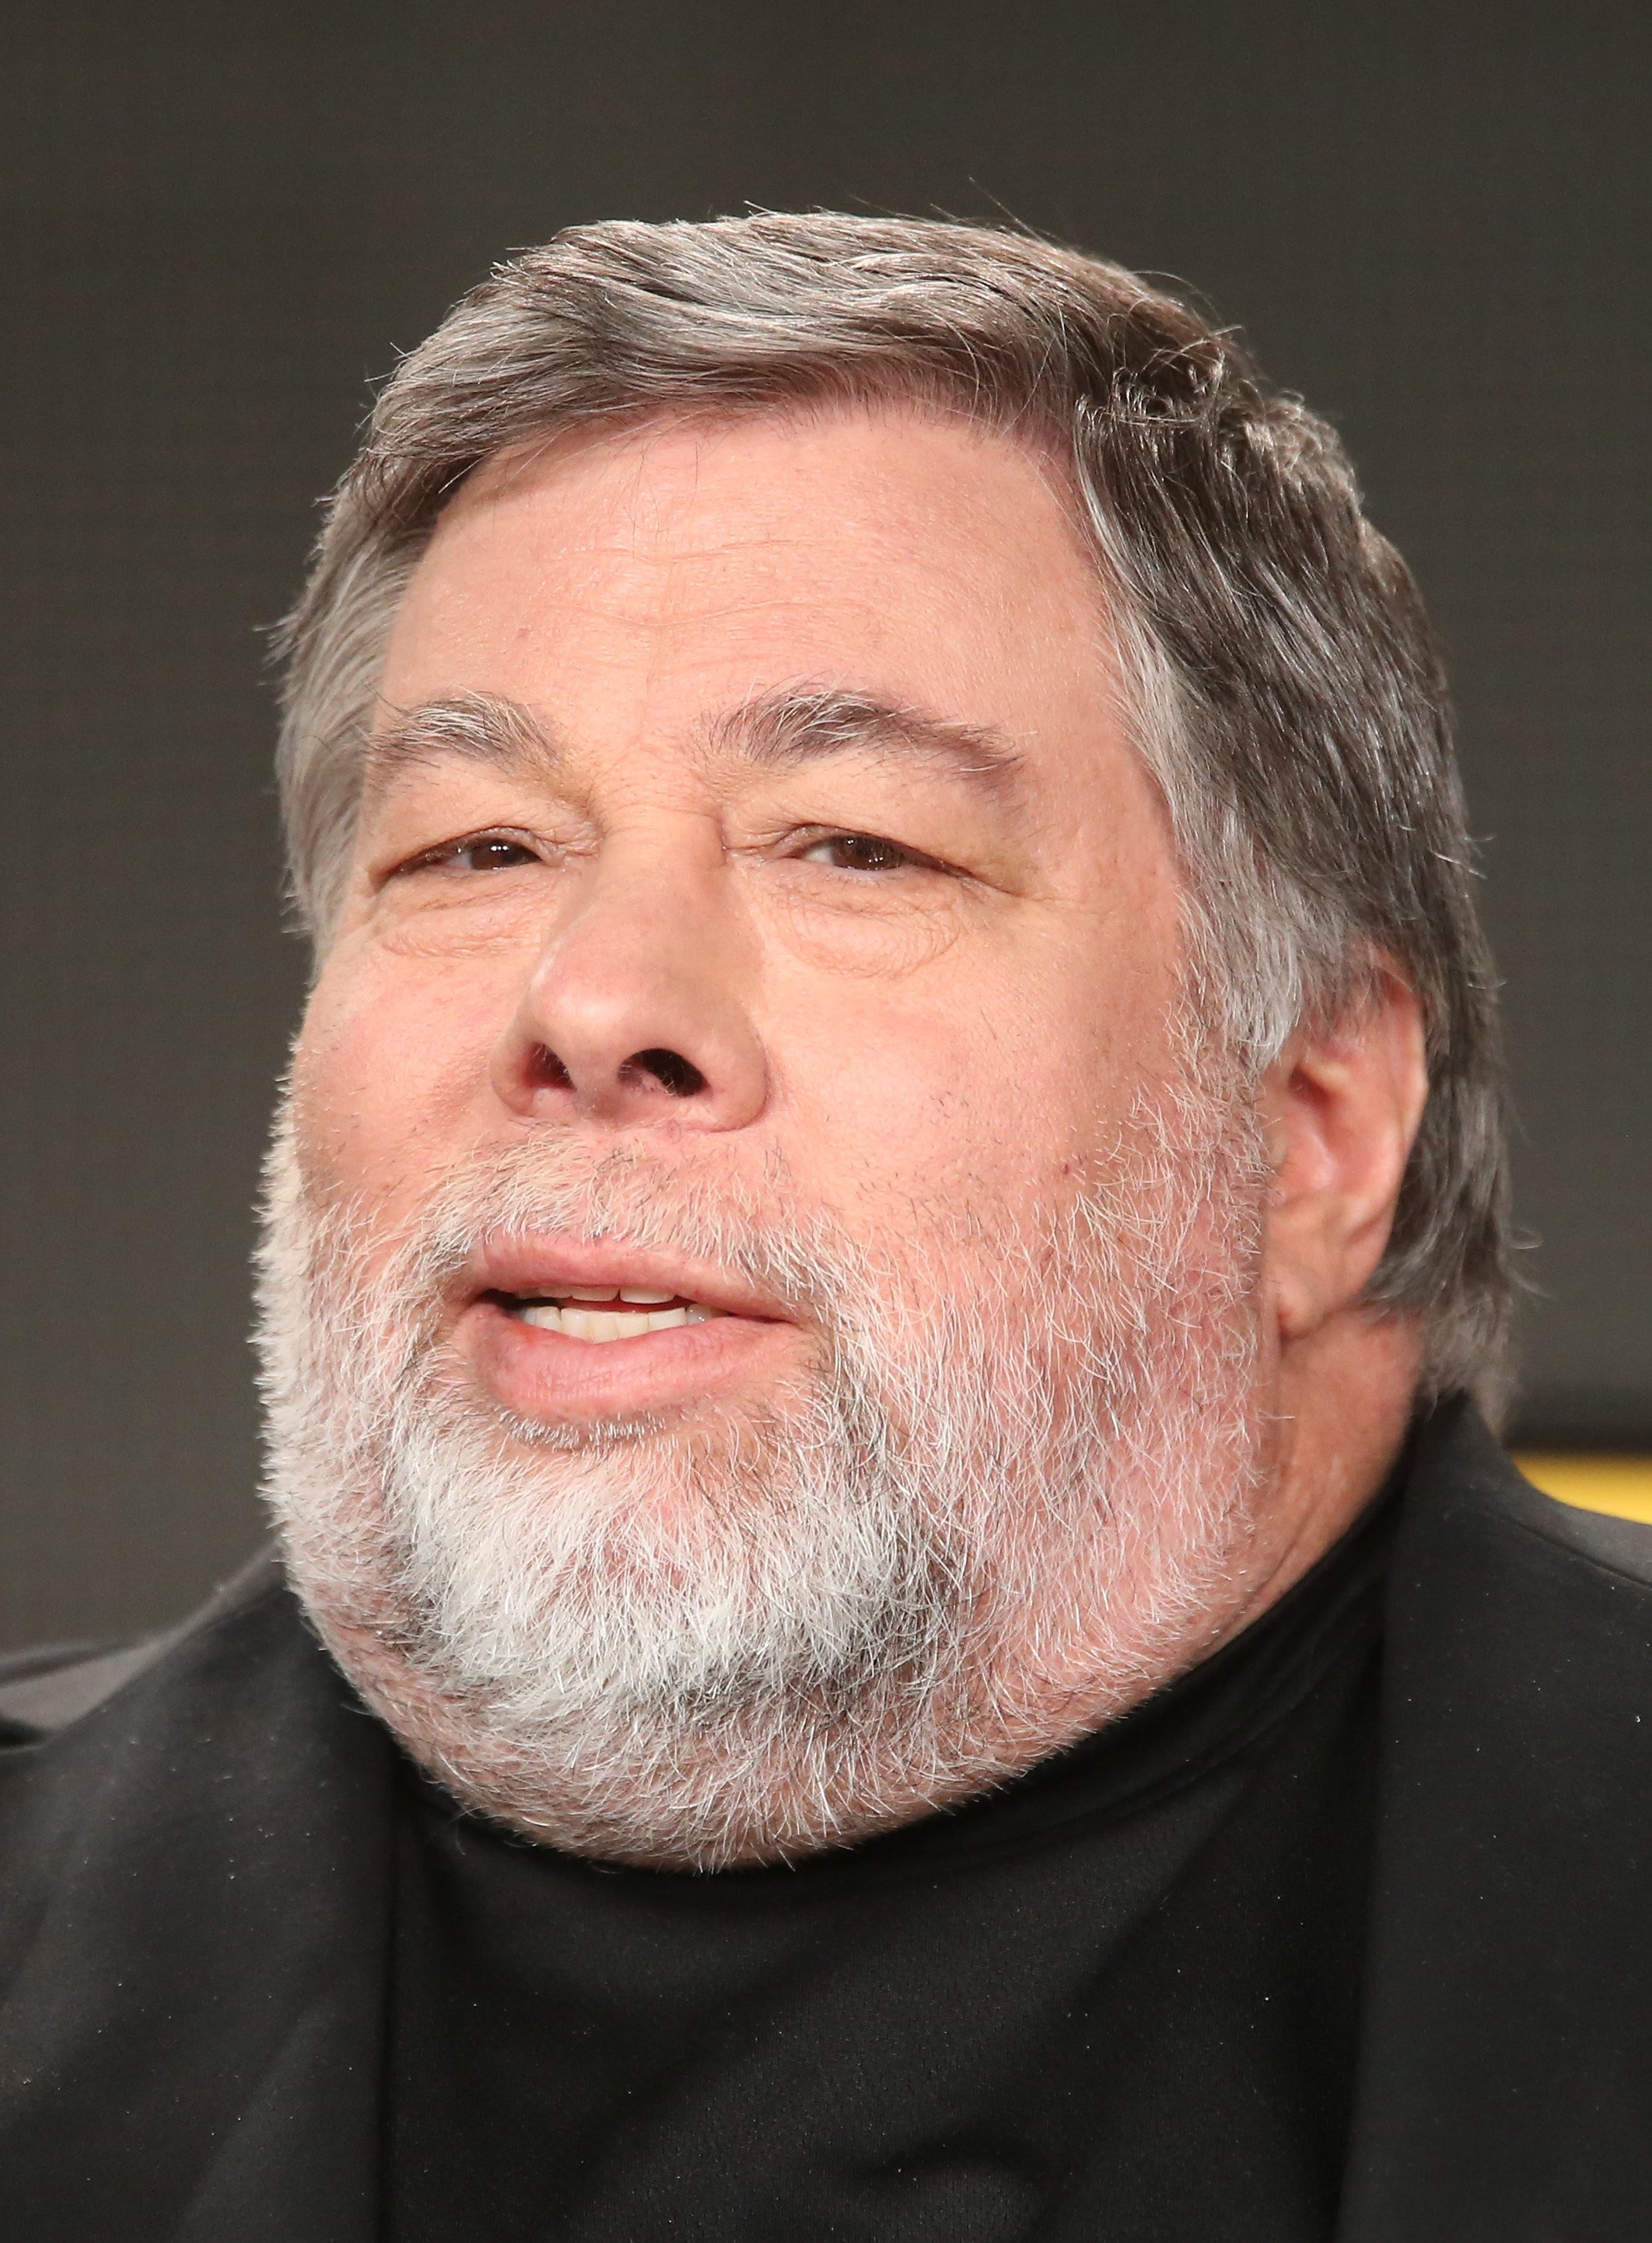 Steve Wozniak, co-founder of Apple, speaks onstage during the National Geographic Channel's 'American Genius' panel at the 2015 Winter Television Critics Association press tour at the Langham Huntington Hotel &amp; Spa on Jan. 7, 2015 in Pasadena, California. (Frederick M. Brown—Getty Images)